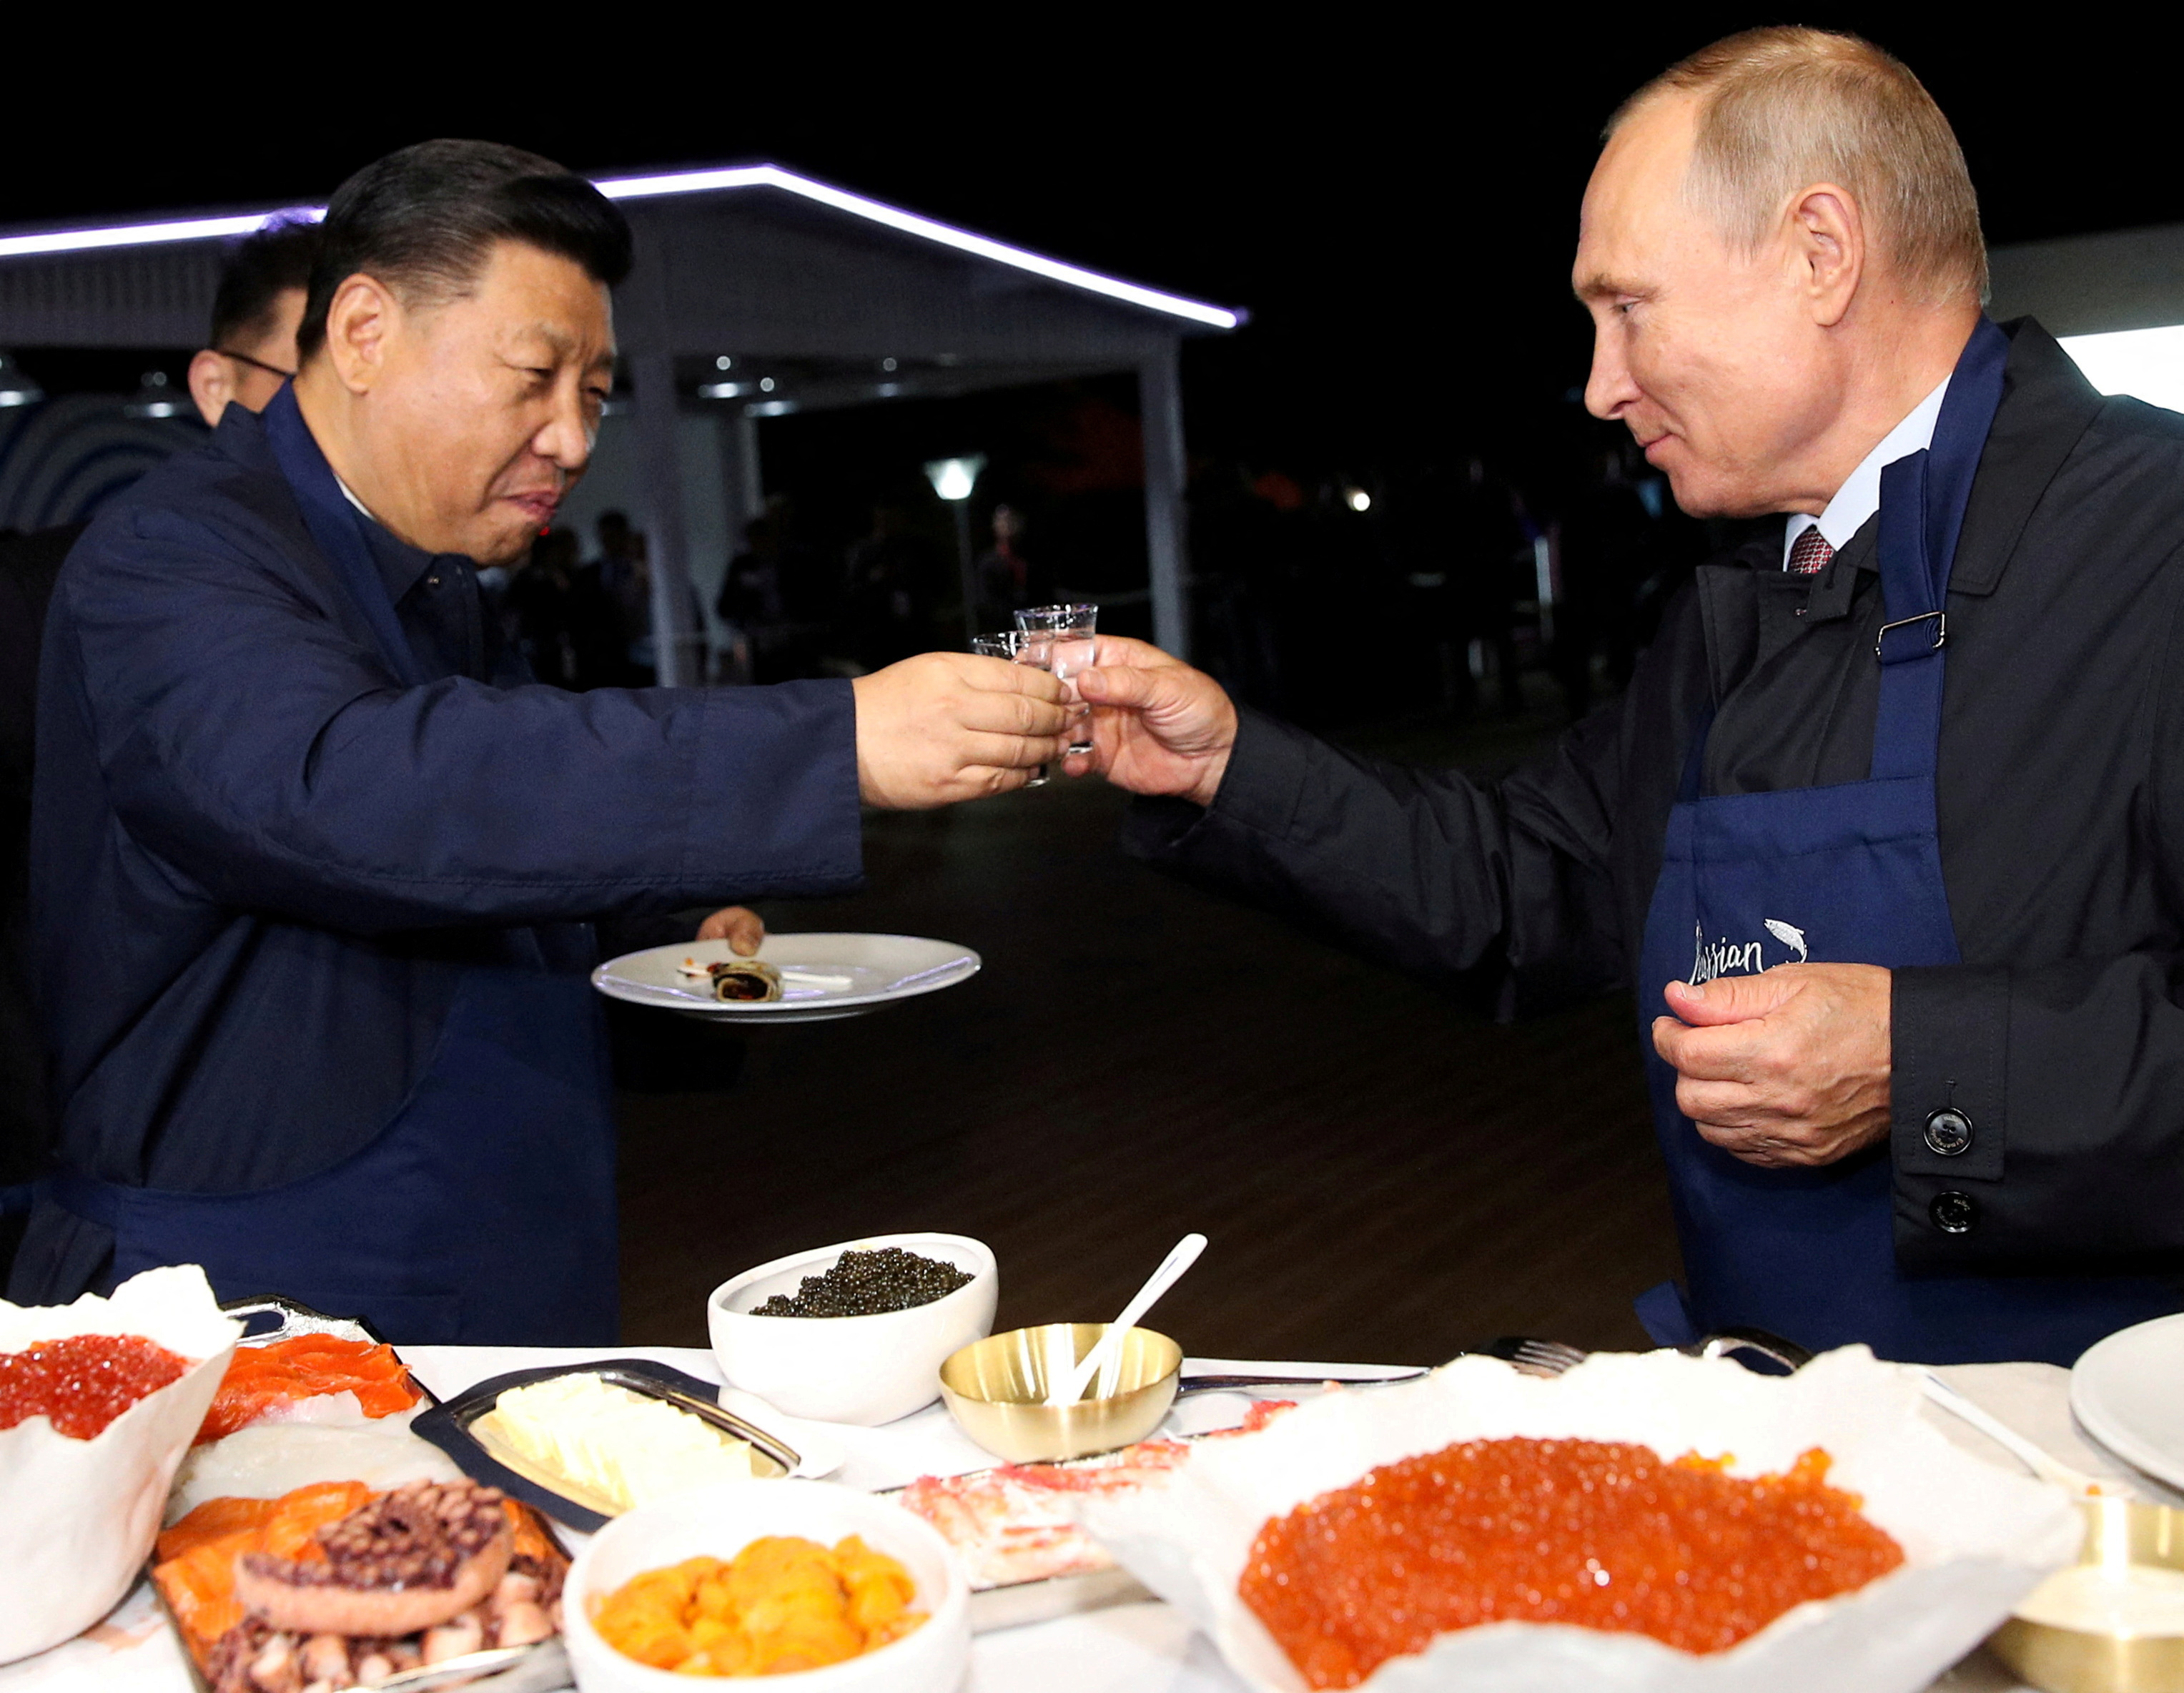 Russian President Vladimir Putin and Chinese President Xi Jinping toast during a visit to the Far East Street exhibition on the sidelines of the Eastern Economic Forum in Vladivostok